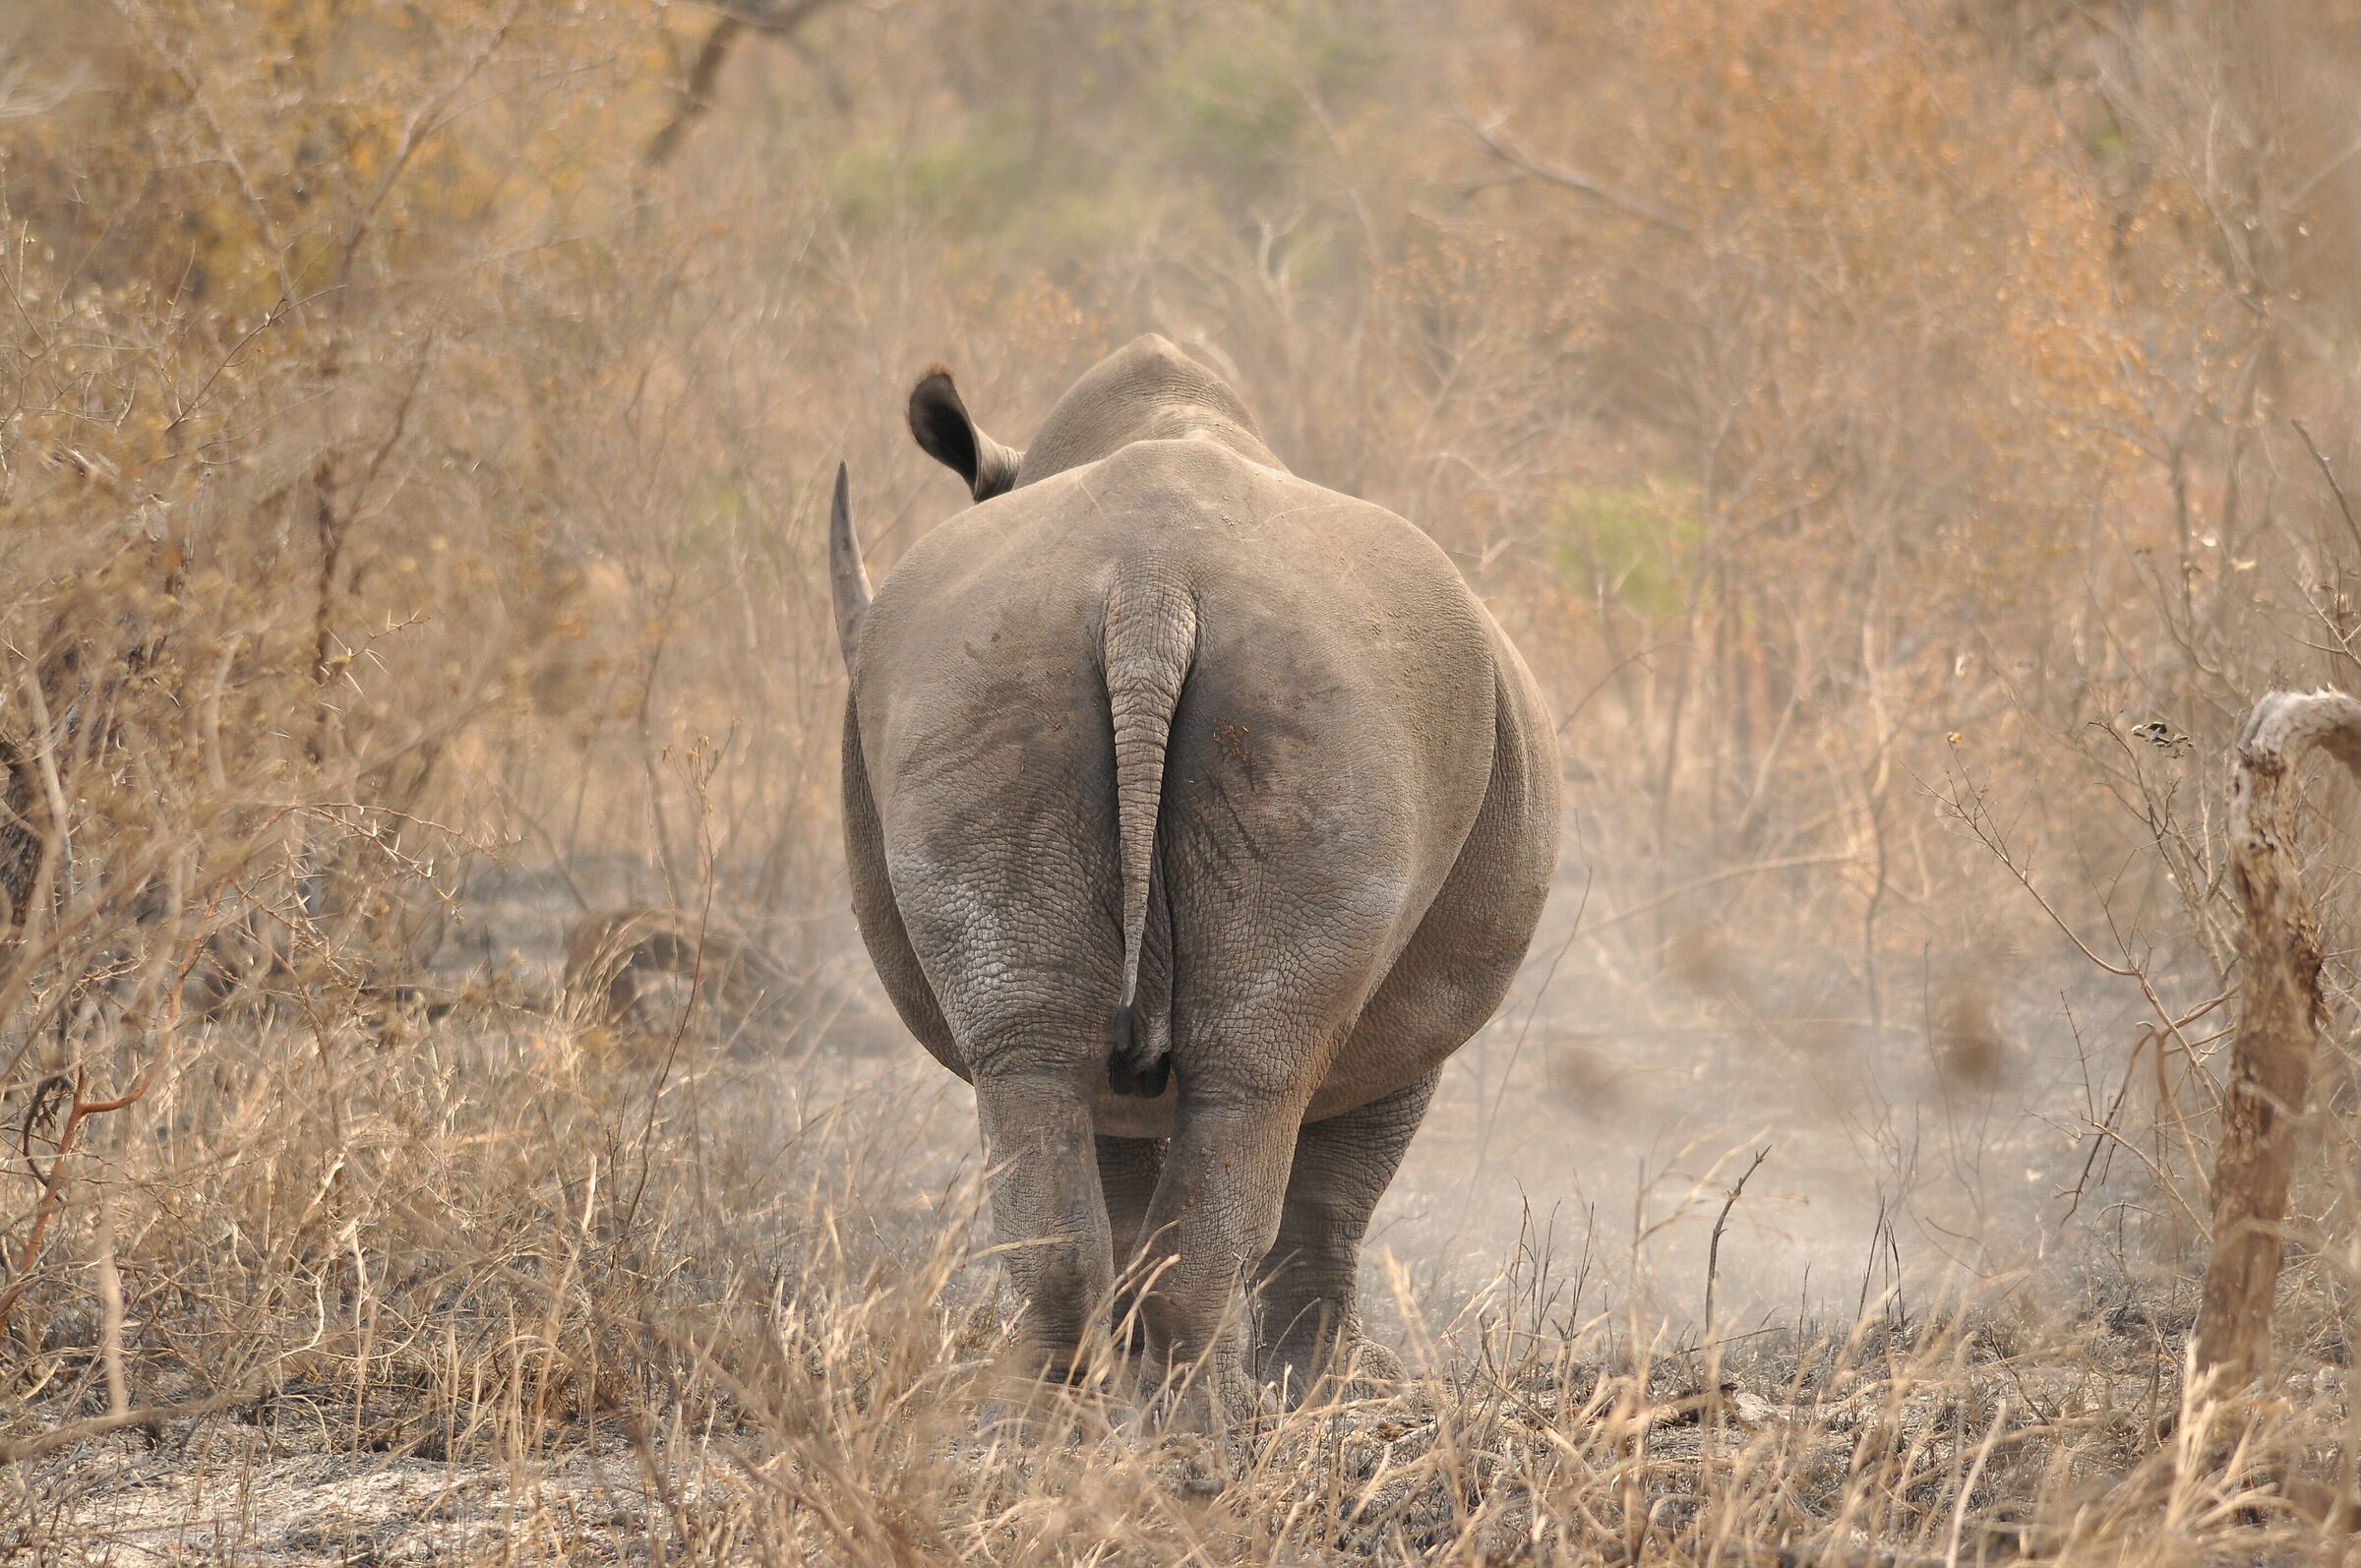 Rhino from behind...